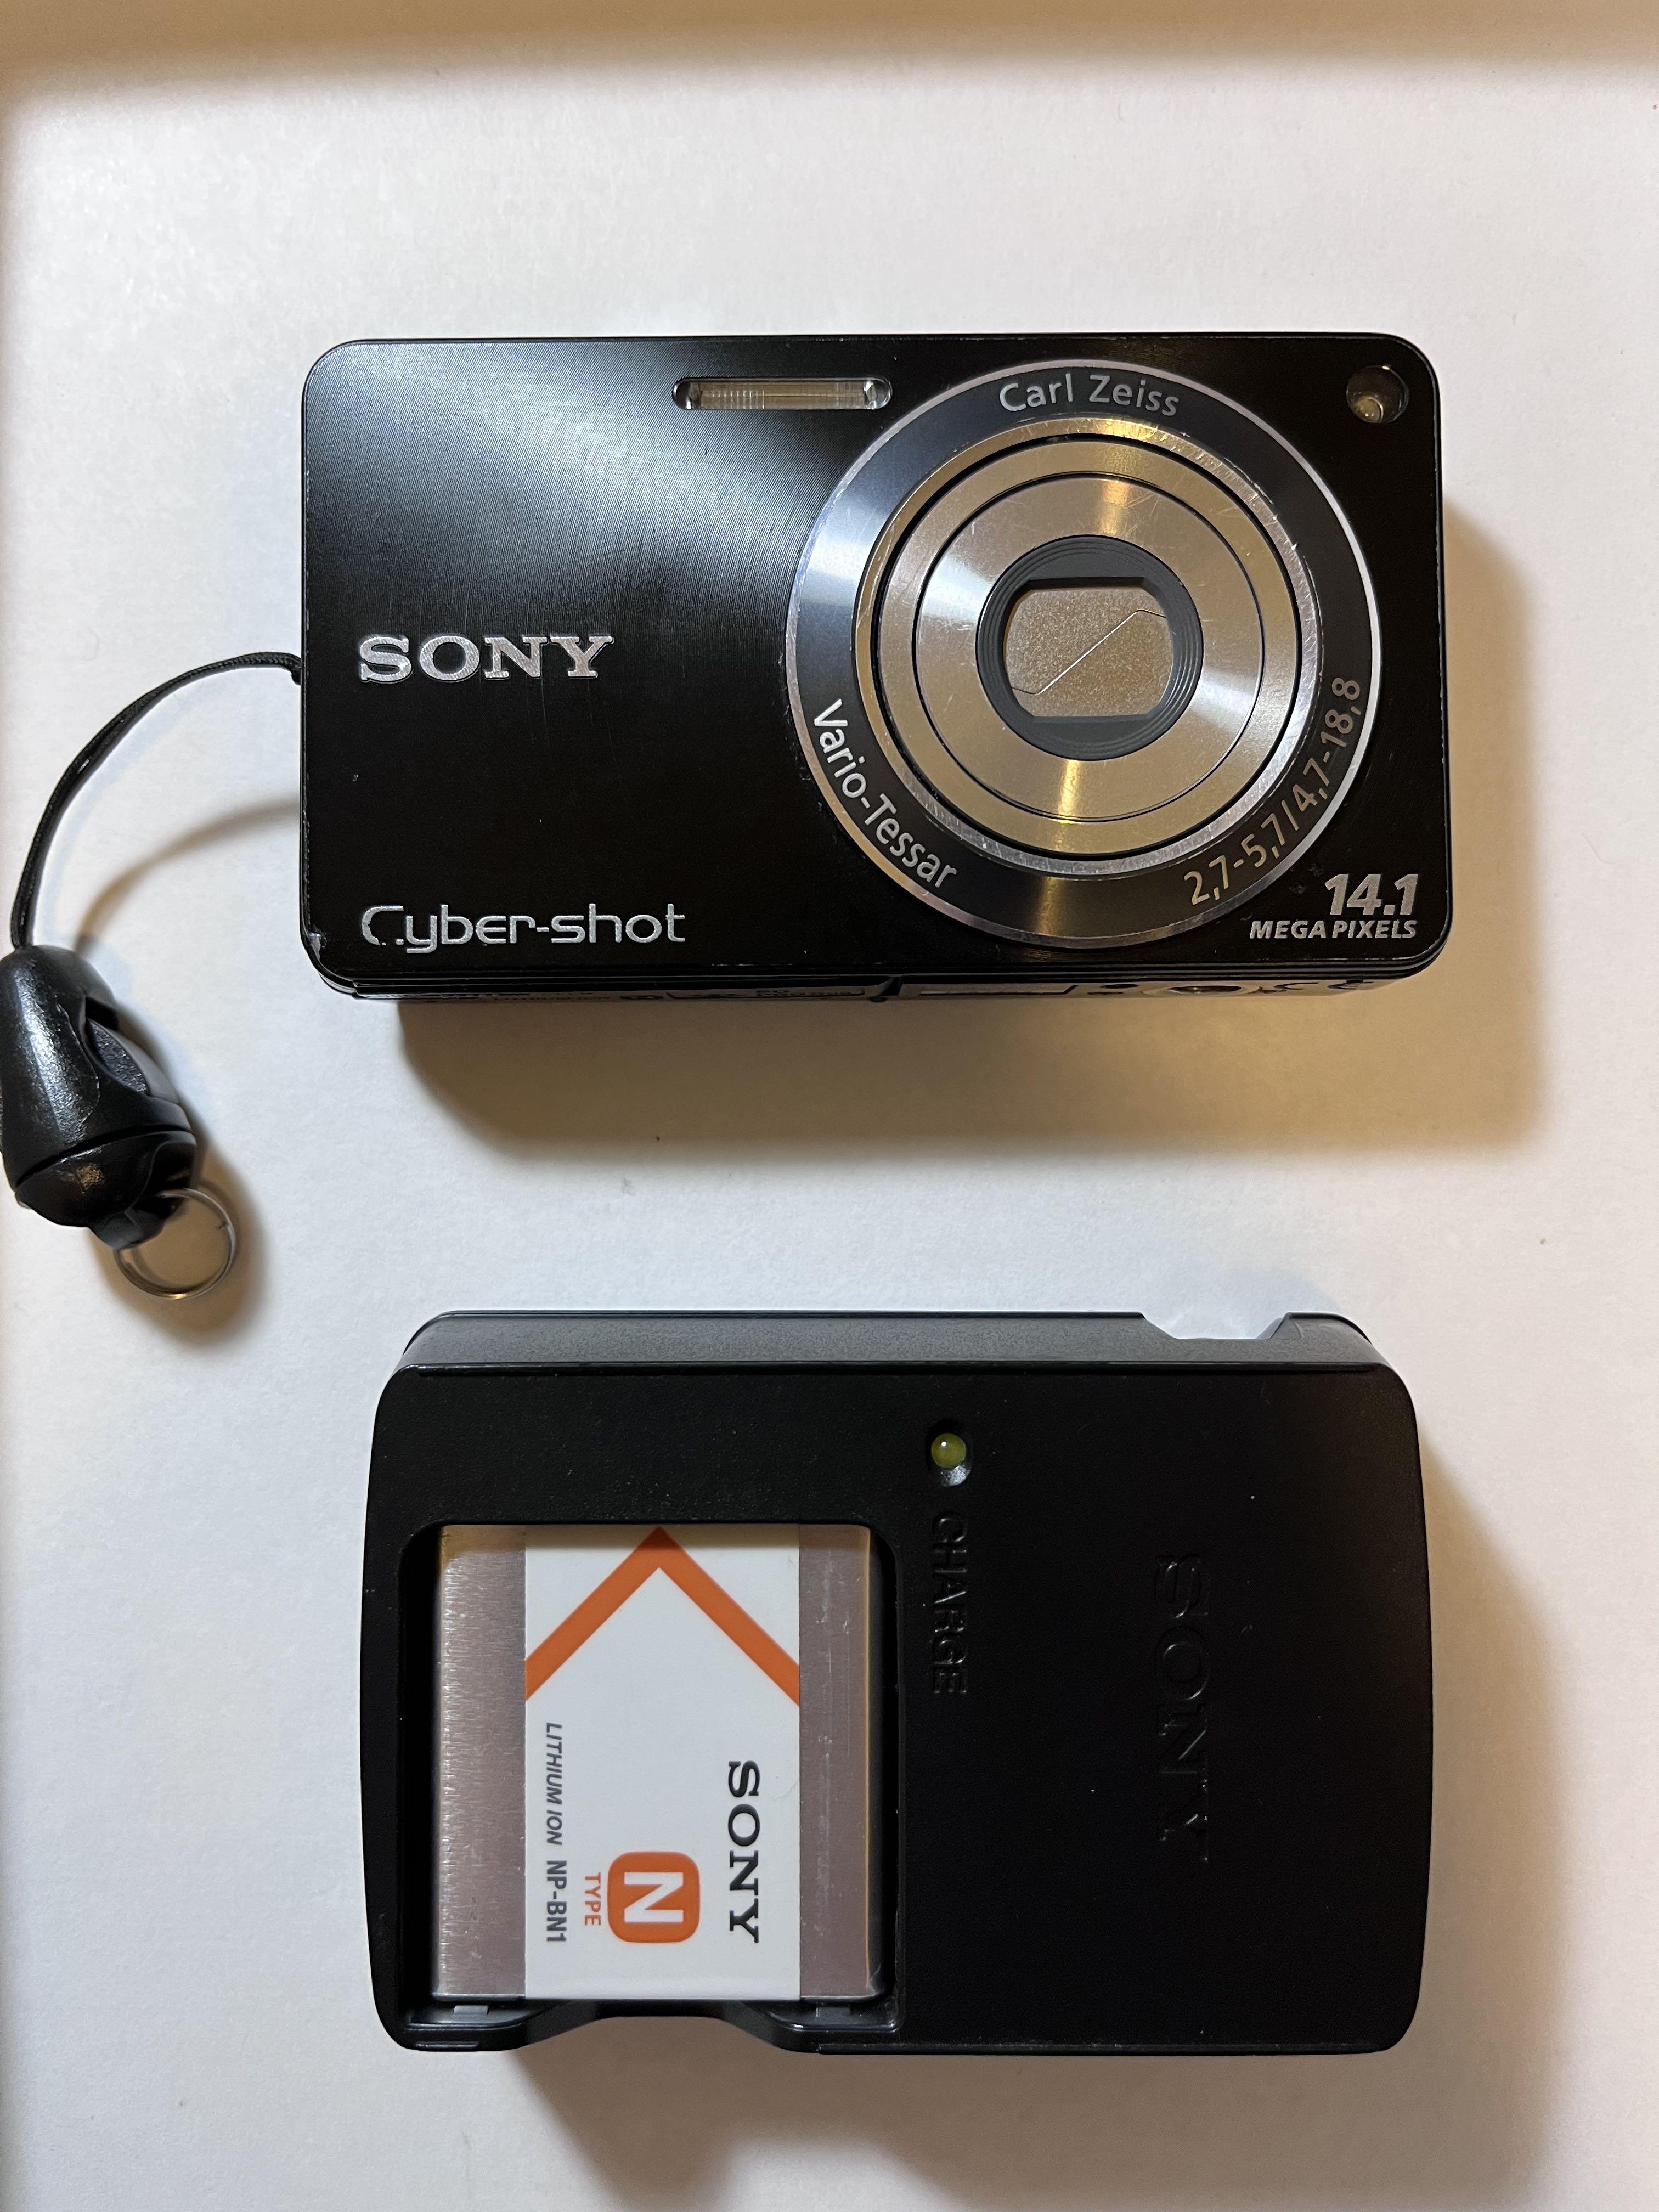  Sony Cyber-Shot DSC-W530 14.1 MP Digital Camera with Carl  Zeiss Vario-Tessar 4x Wide-Angle Optical Zoom Lens and 2.7-inch LCD (Black)  (OLD MODEL) : Point And Shoot Digital Cameras : Electronics